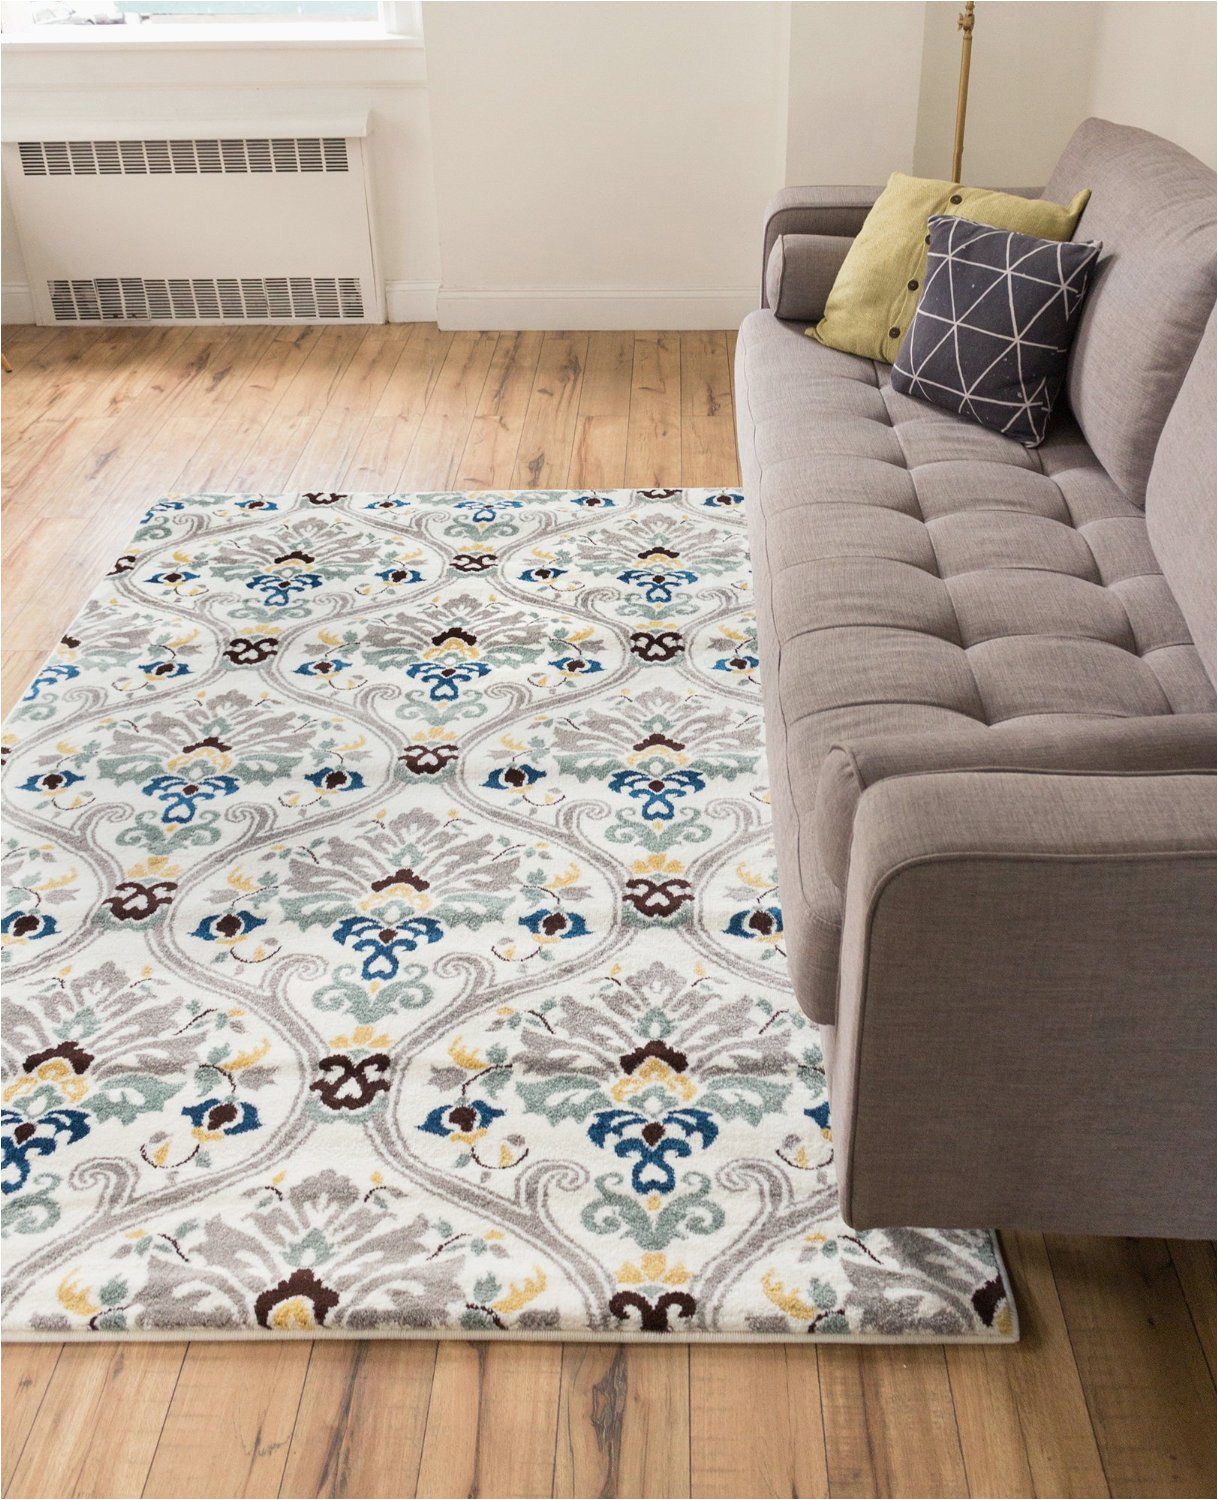 8×10 Blue and Brown area Rugs Robot Check